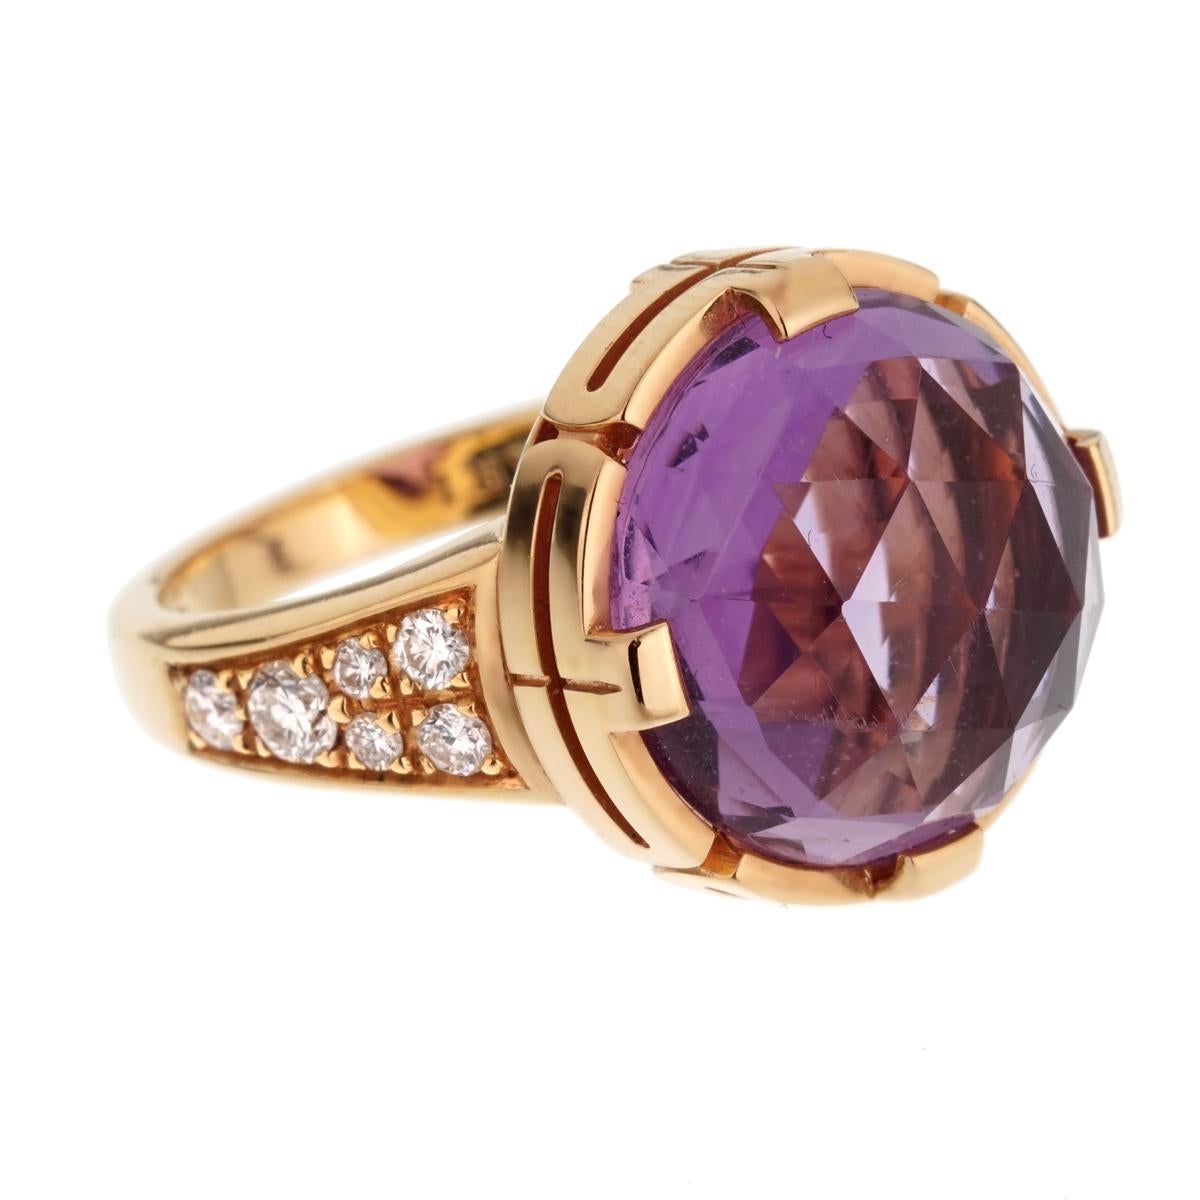 A chic Bulgari Parentesi Cocktail amethyst ring in 18k pink gold set with round brilliant pavé diamonds. The twelve diamonds weigh 0.38 total carats, and the ring measures a size 5 1/4 which can be resized.